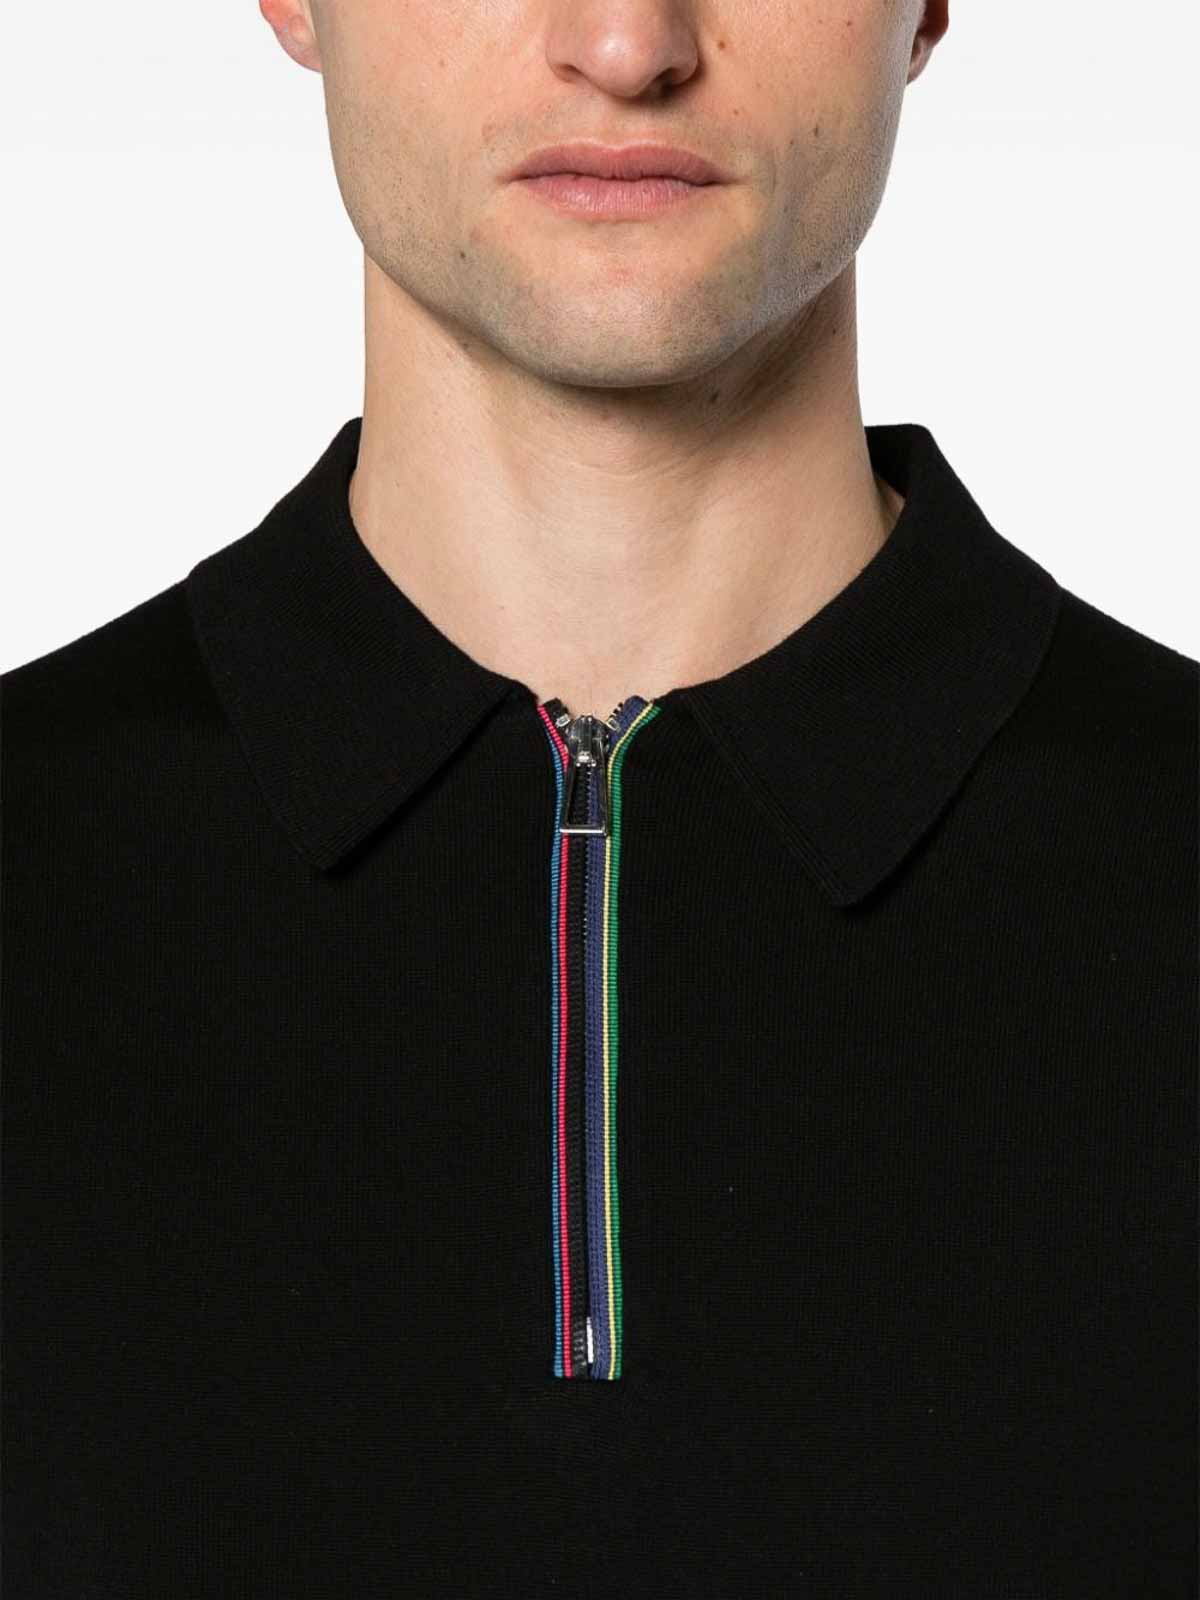 Shop Paul Smith Polo With Zip In Black